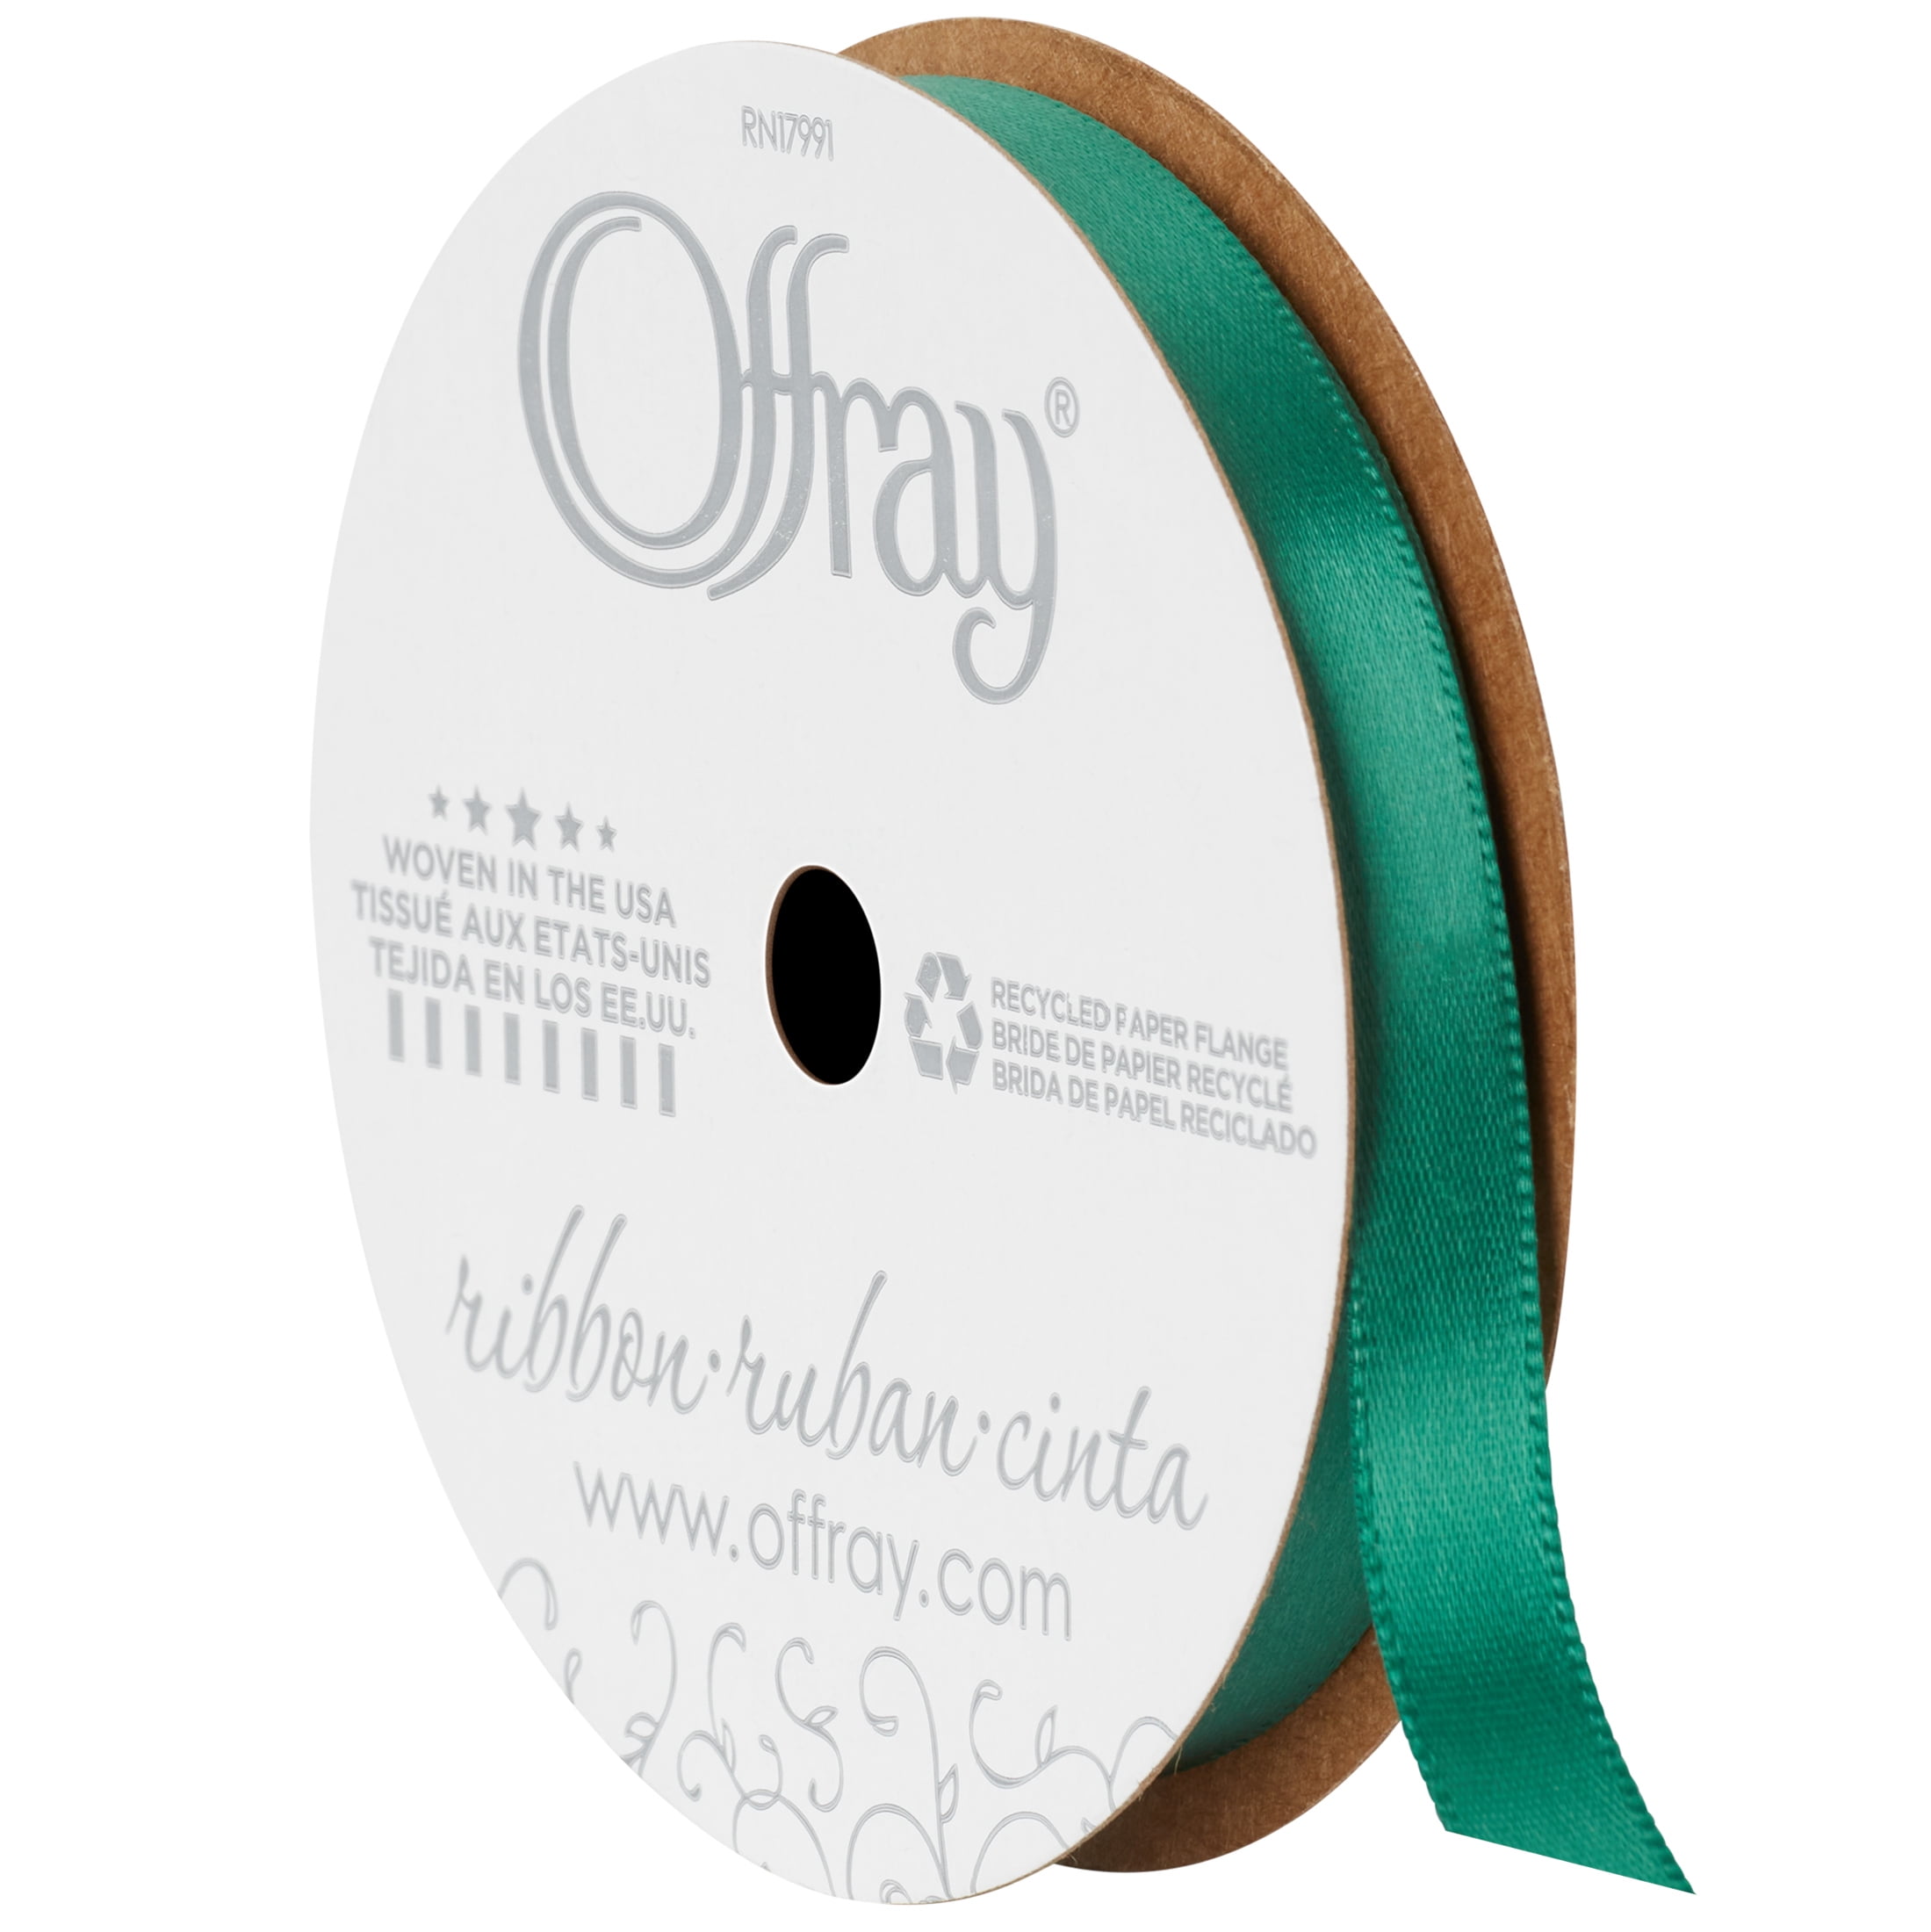 Offray Ribbon, Forest Green 3/8 inch Single Face Satin Polyester Ribbon, 18 feet